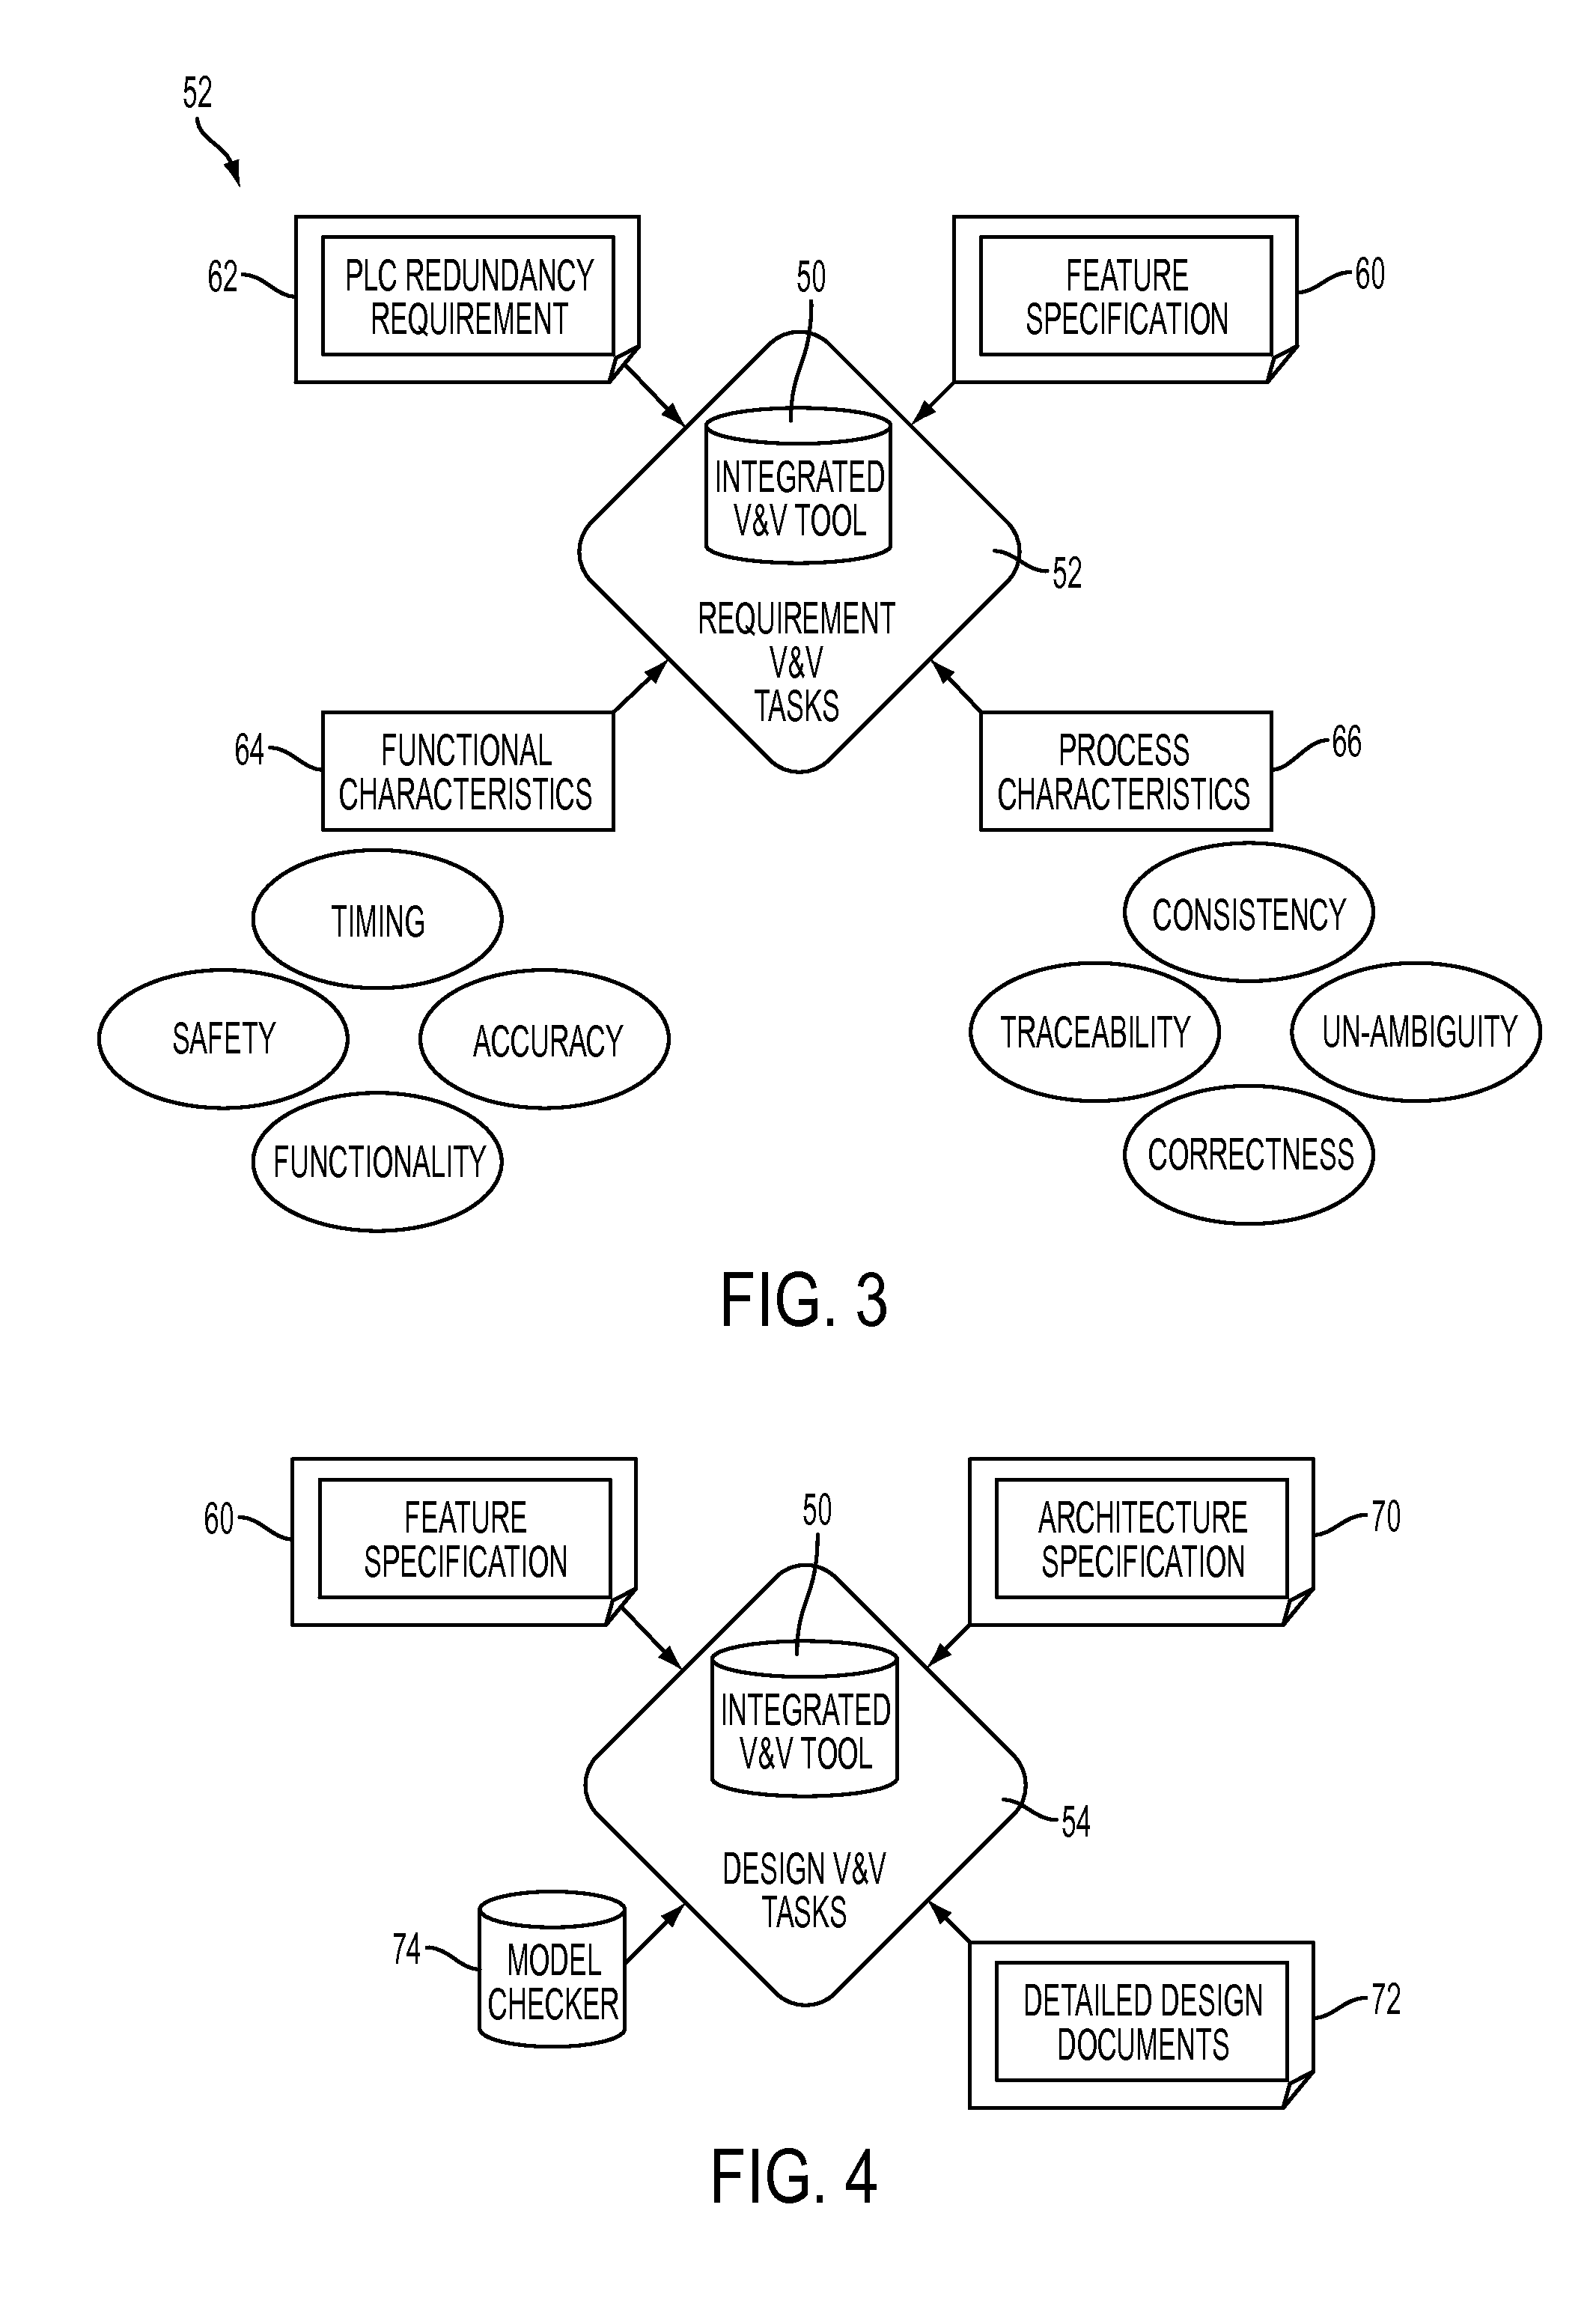 System and method for verification and validation of redundancy software in PLC systems